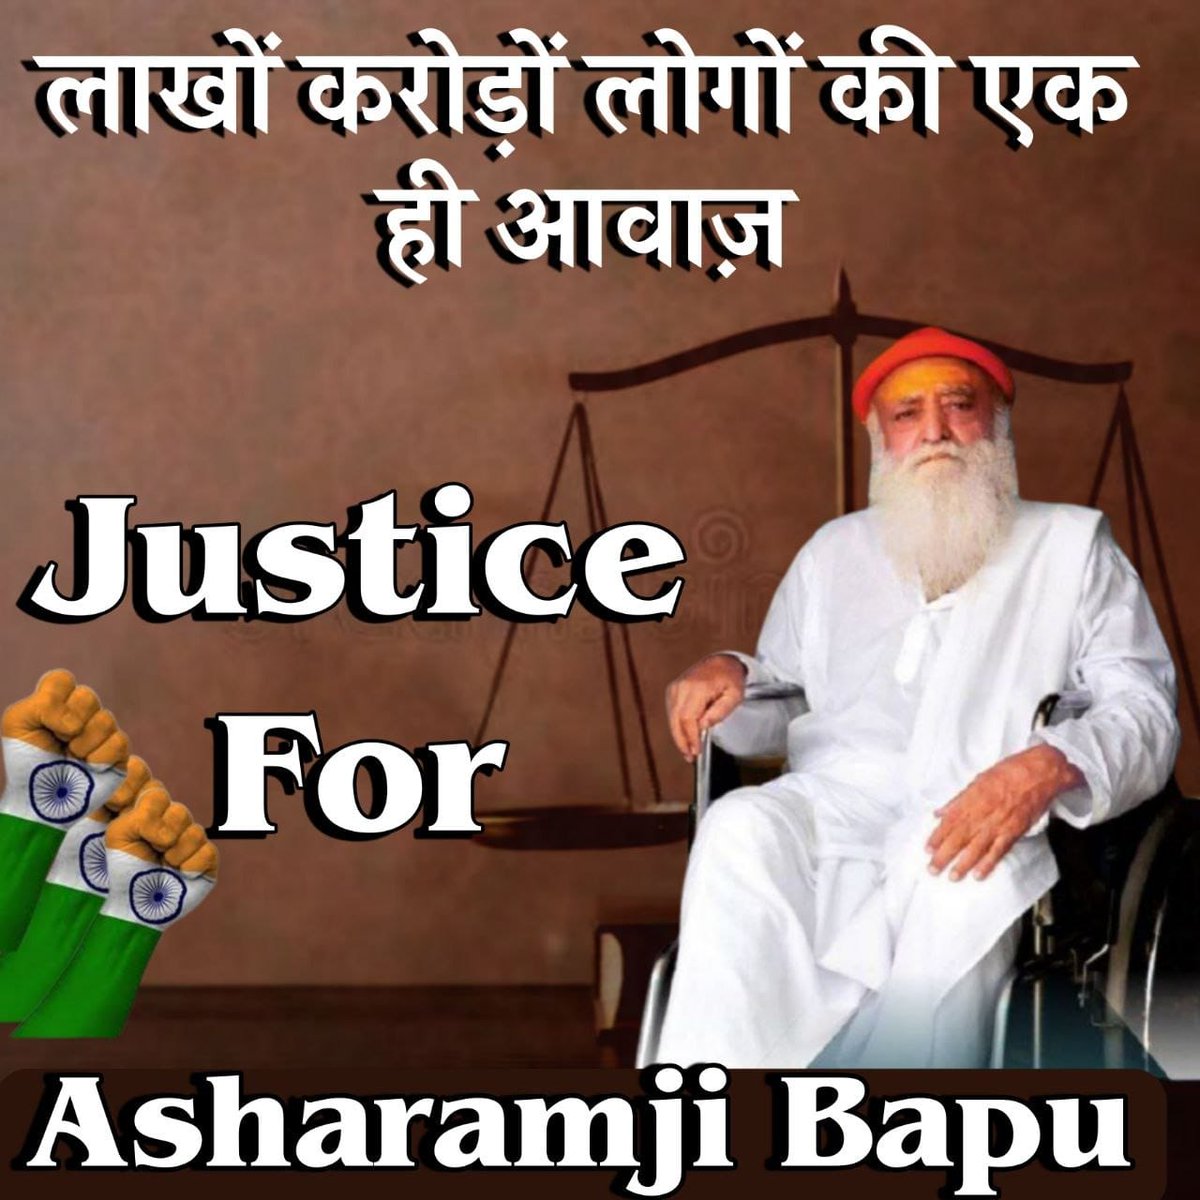 In a world where values are tested, Sant Shri Asharamji Bapu reminds us of the importance of Sanatan principles. Fair justice is not just a concept but a practice that shapes a better society. #StandUpForDharma We want justice for Bapuji